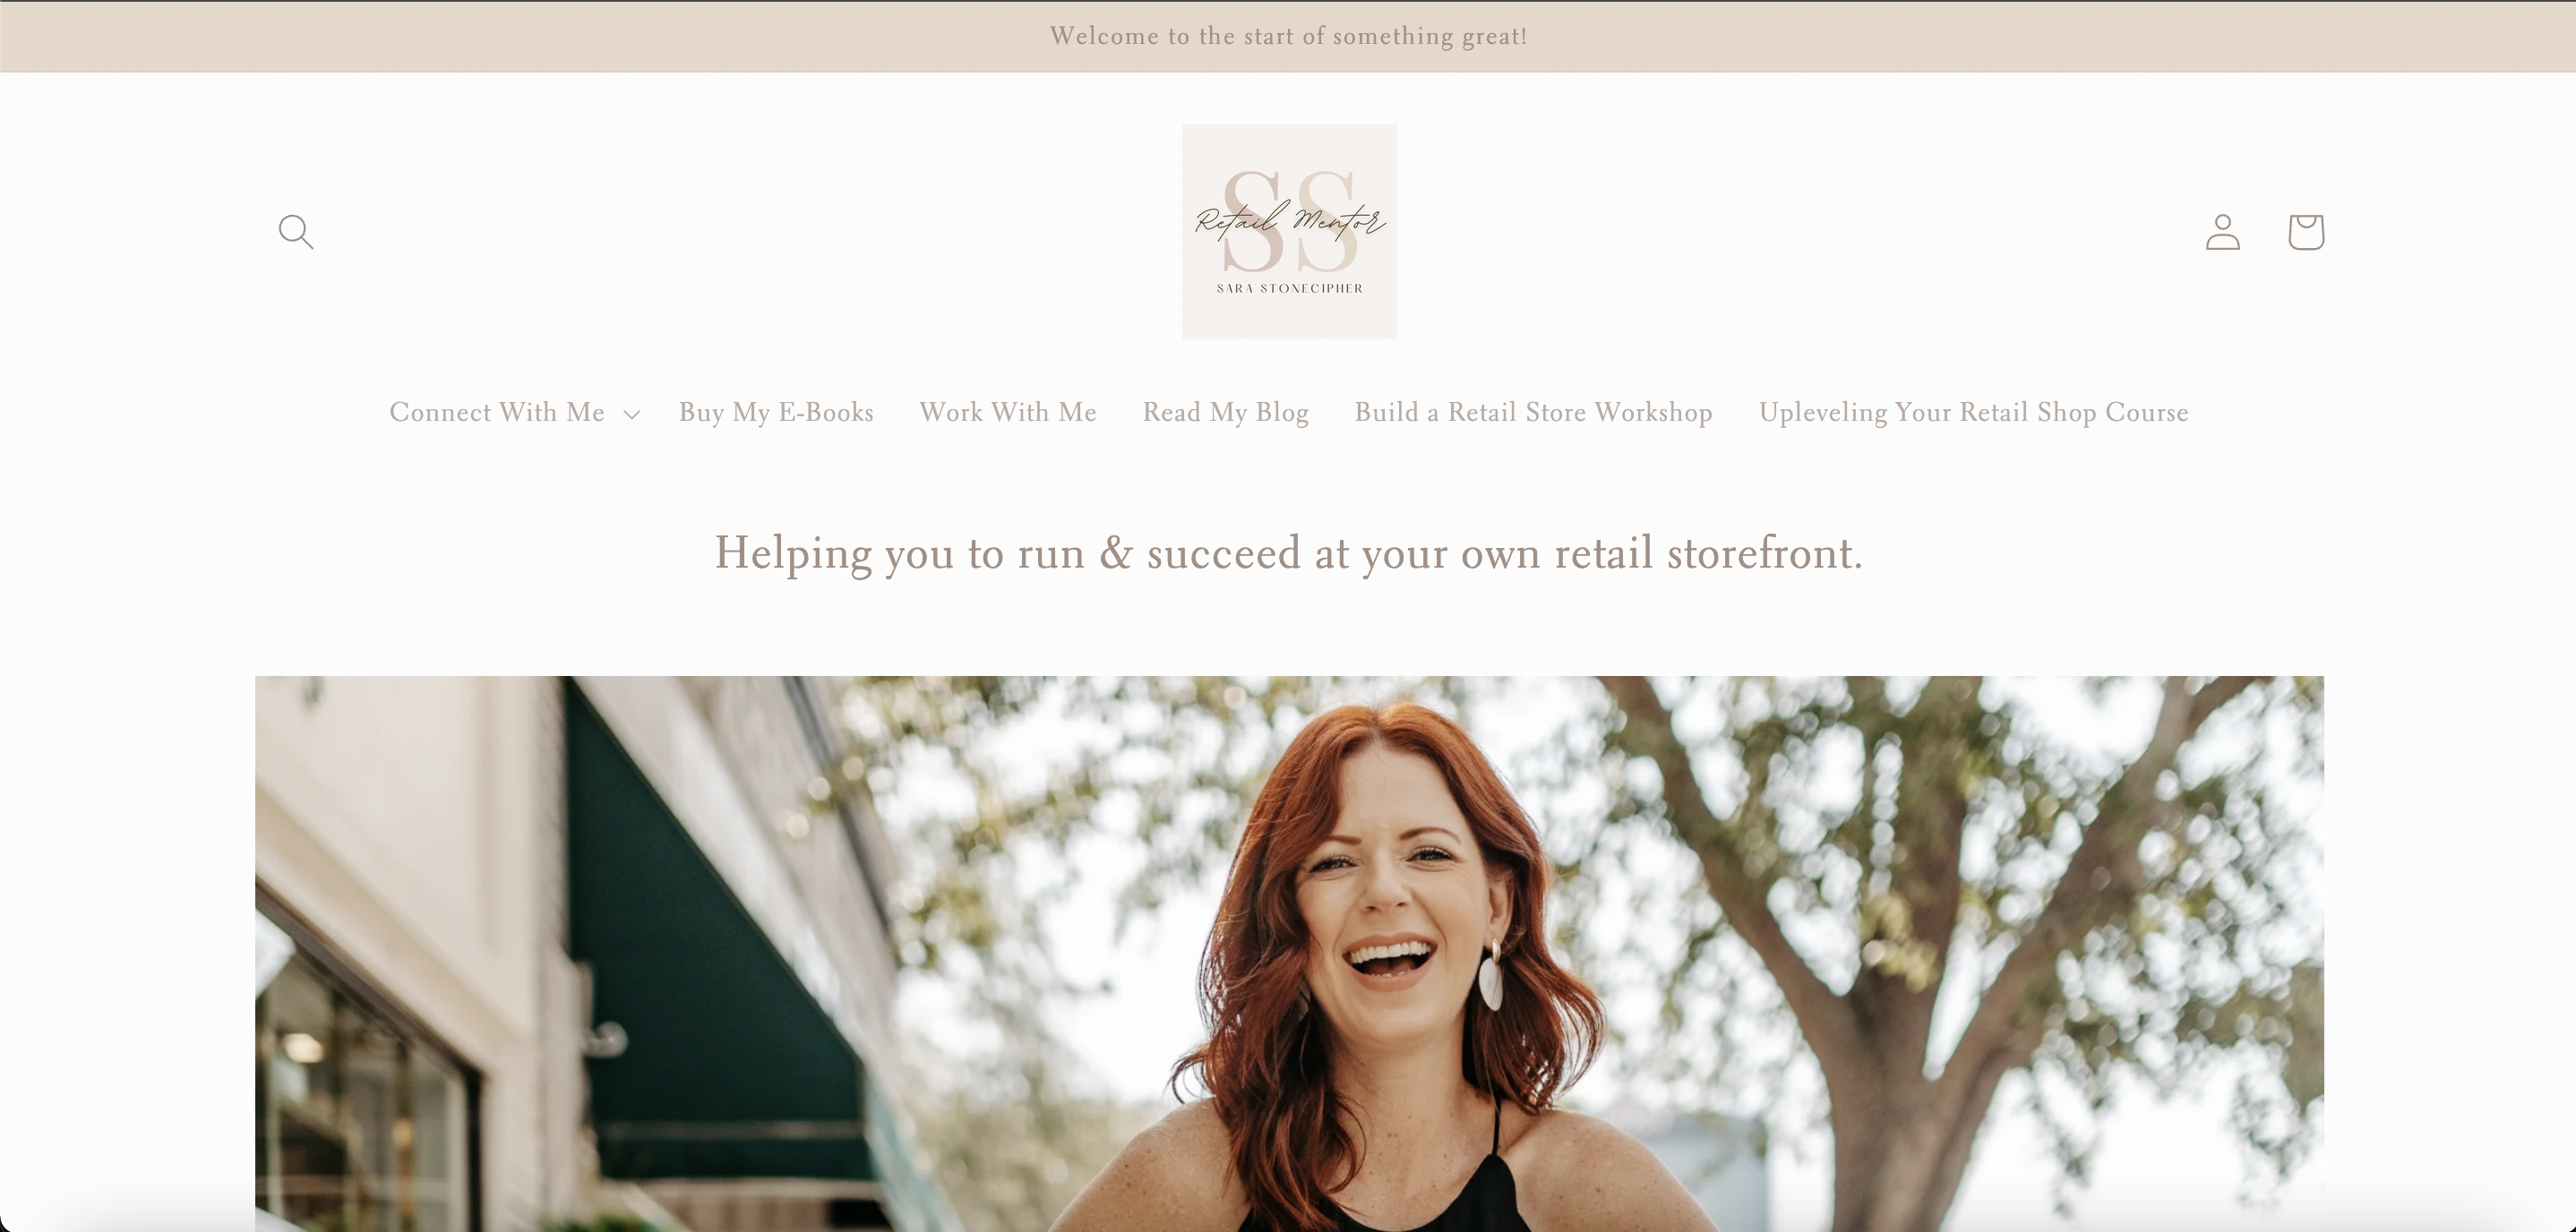 How To Run A Retail Store home page